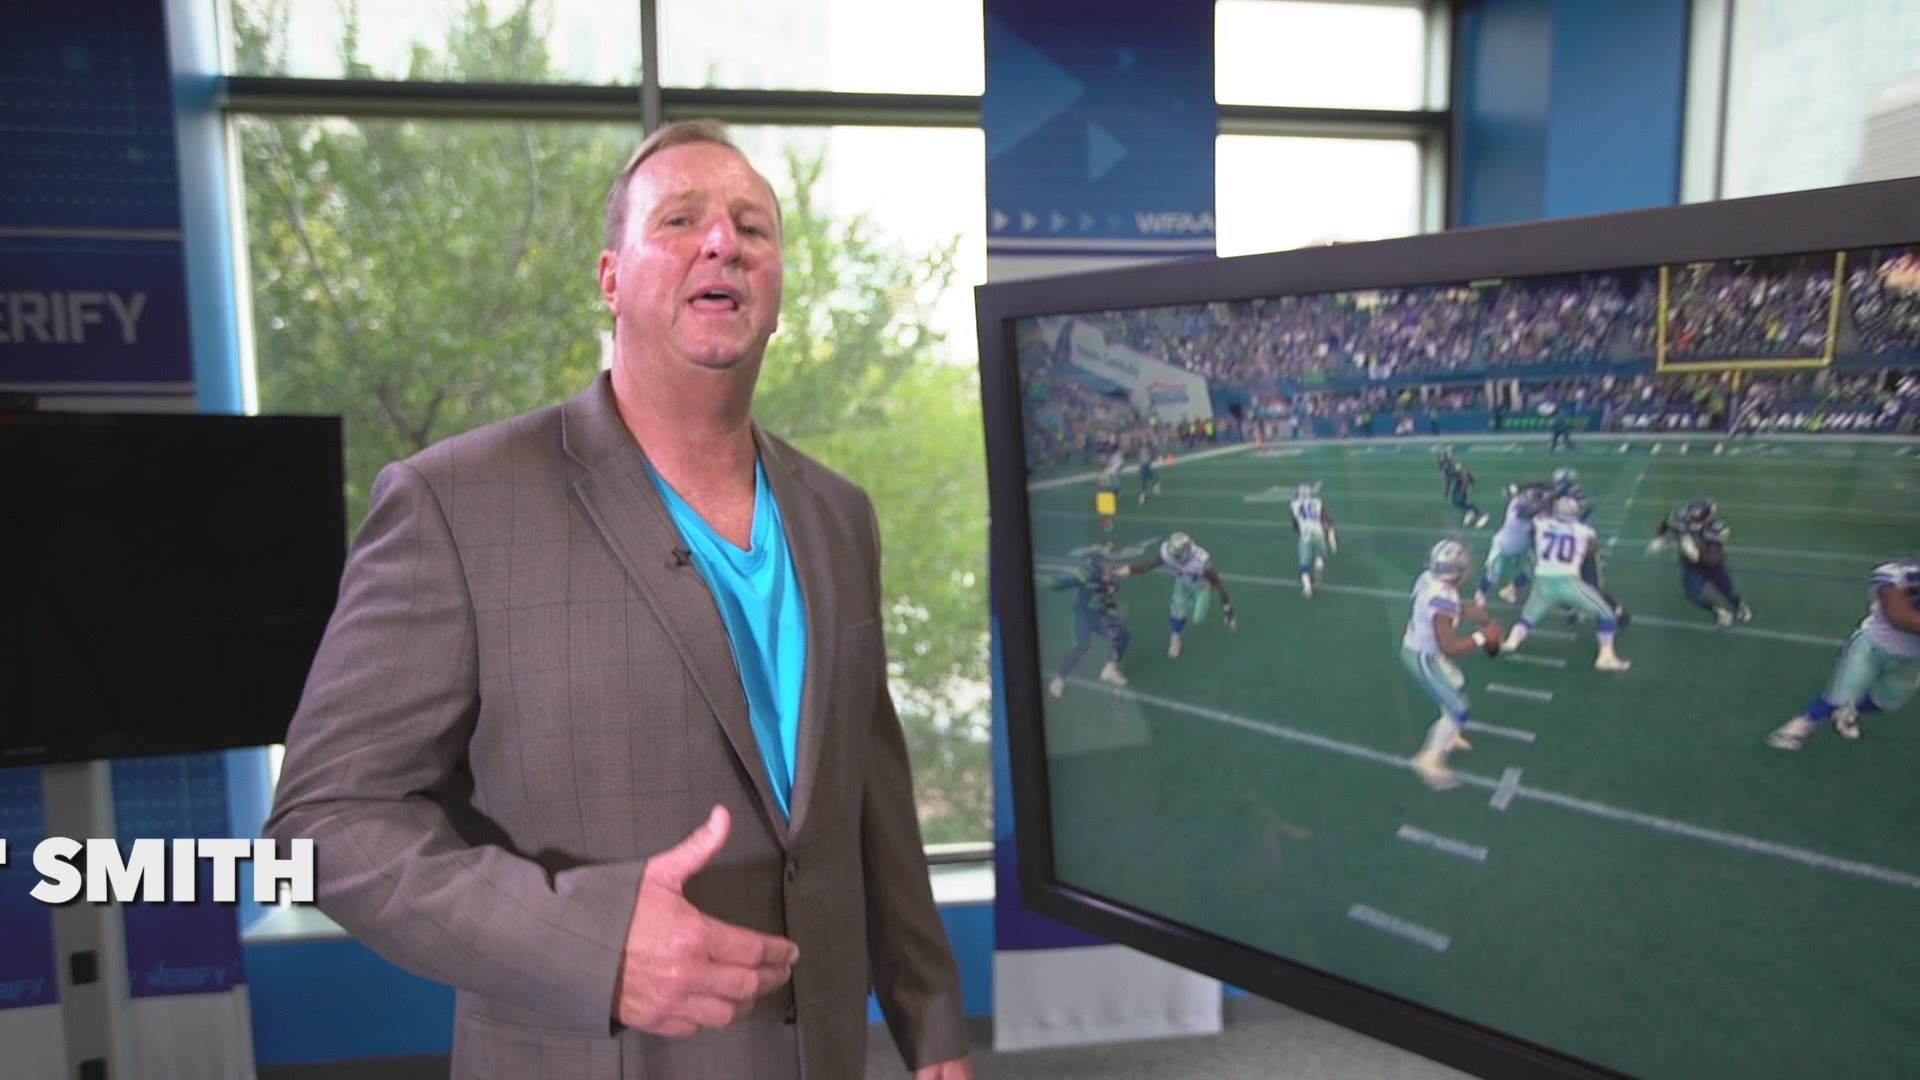 Former Cowboys coach and scout Glenn "Stretch" Smith breaks down two plays from the Seahawks game that show the wide receivers making Dak look bad. WFAA.com